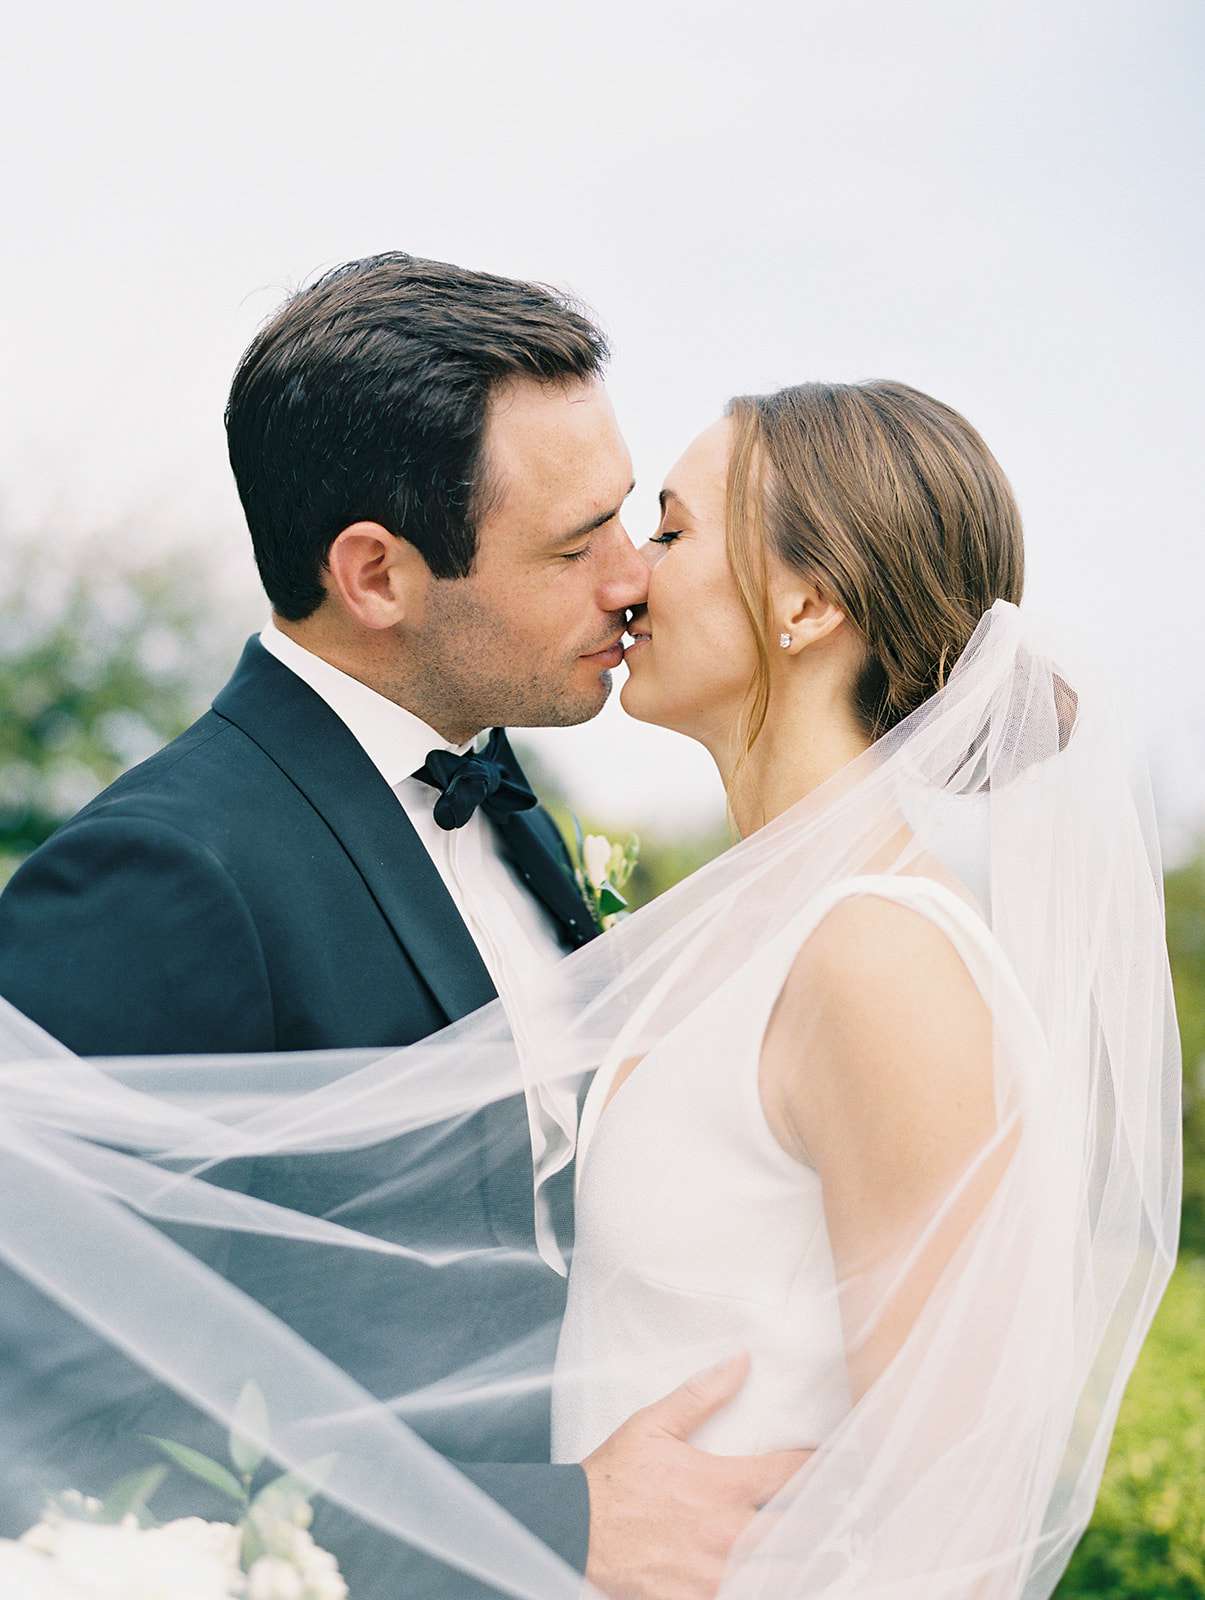 couple kissing with bride's veil flowing in the wind